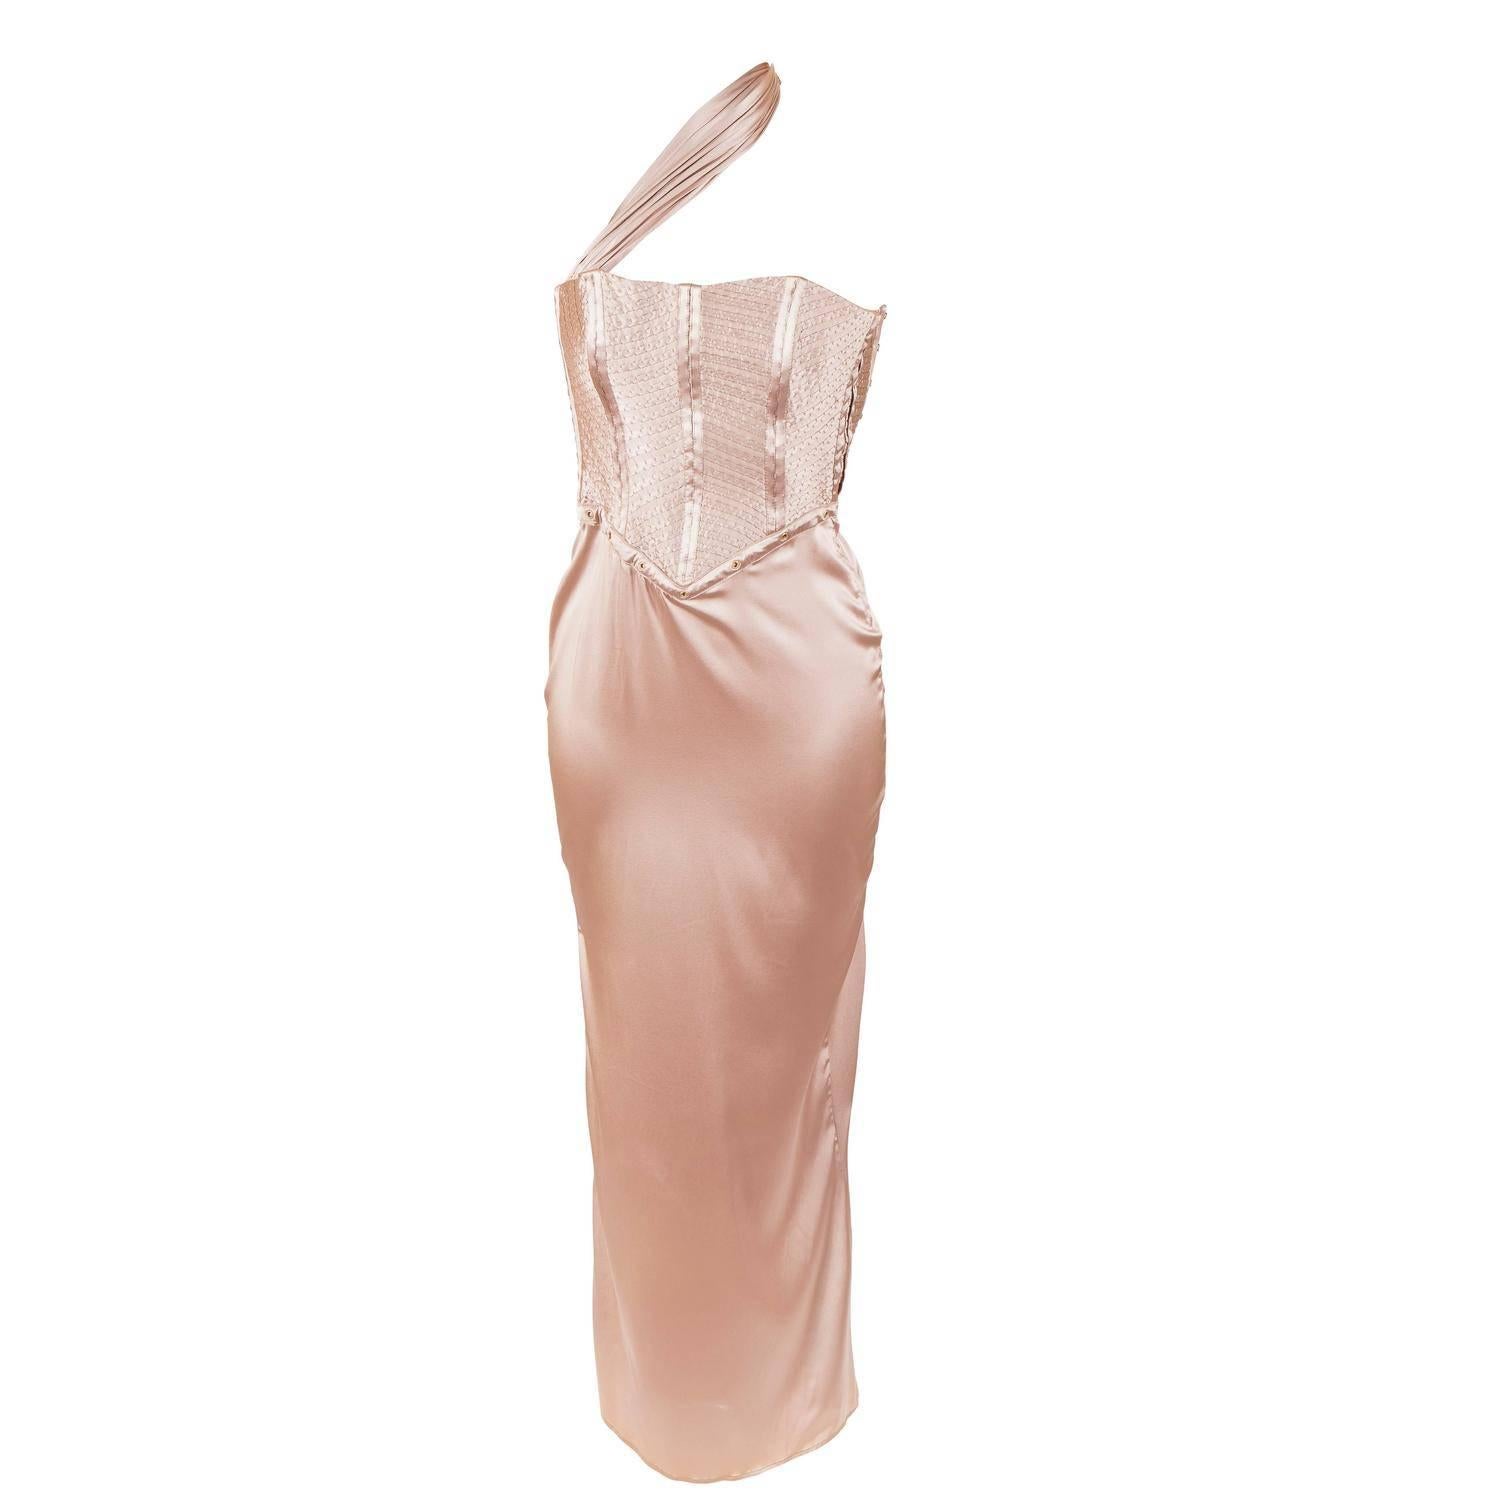 Tom Ford for Gucci Fall 2003 Champagne Silk Jersey Corset Gown size 38